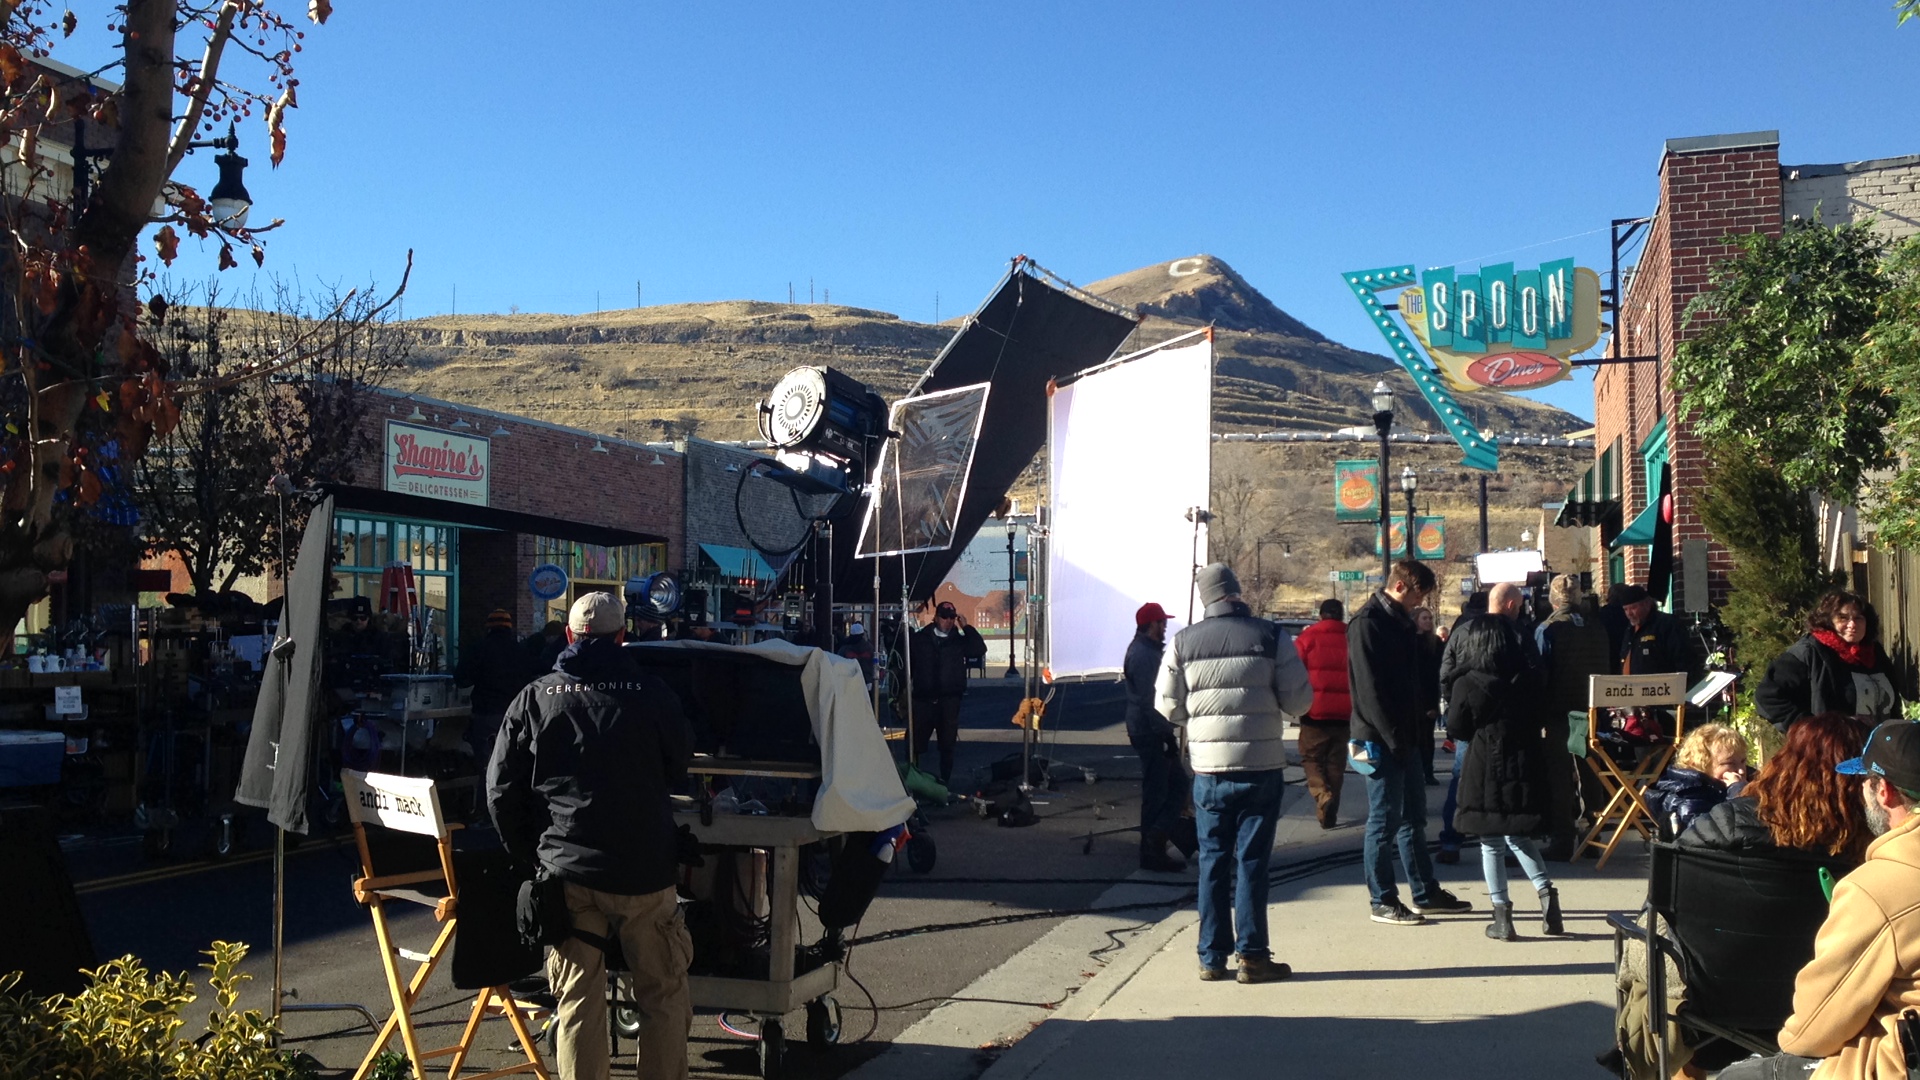 13 new productions will be filmed in Utah, boosting the economy....